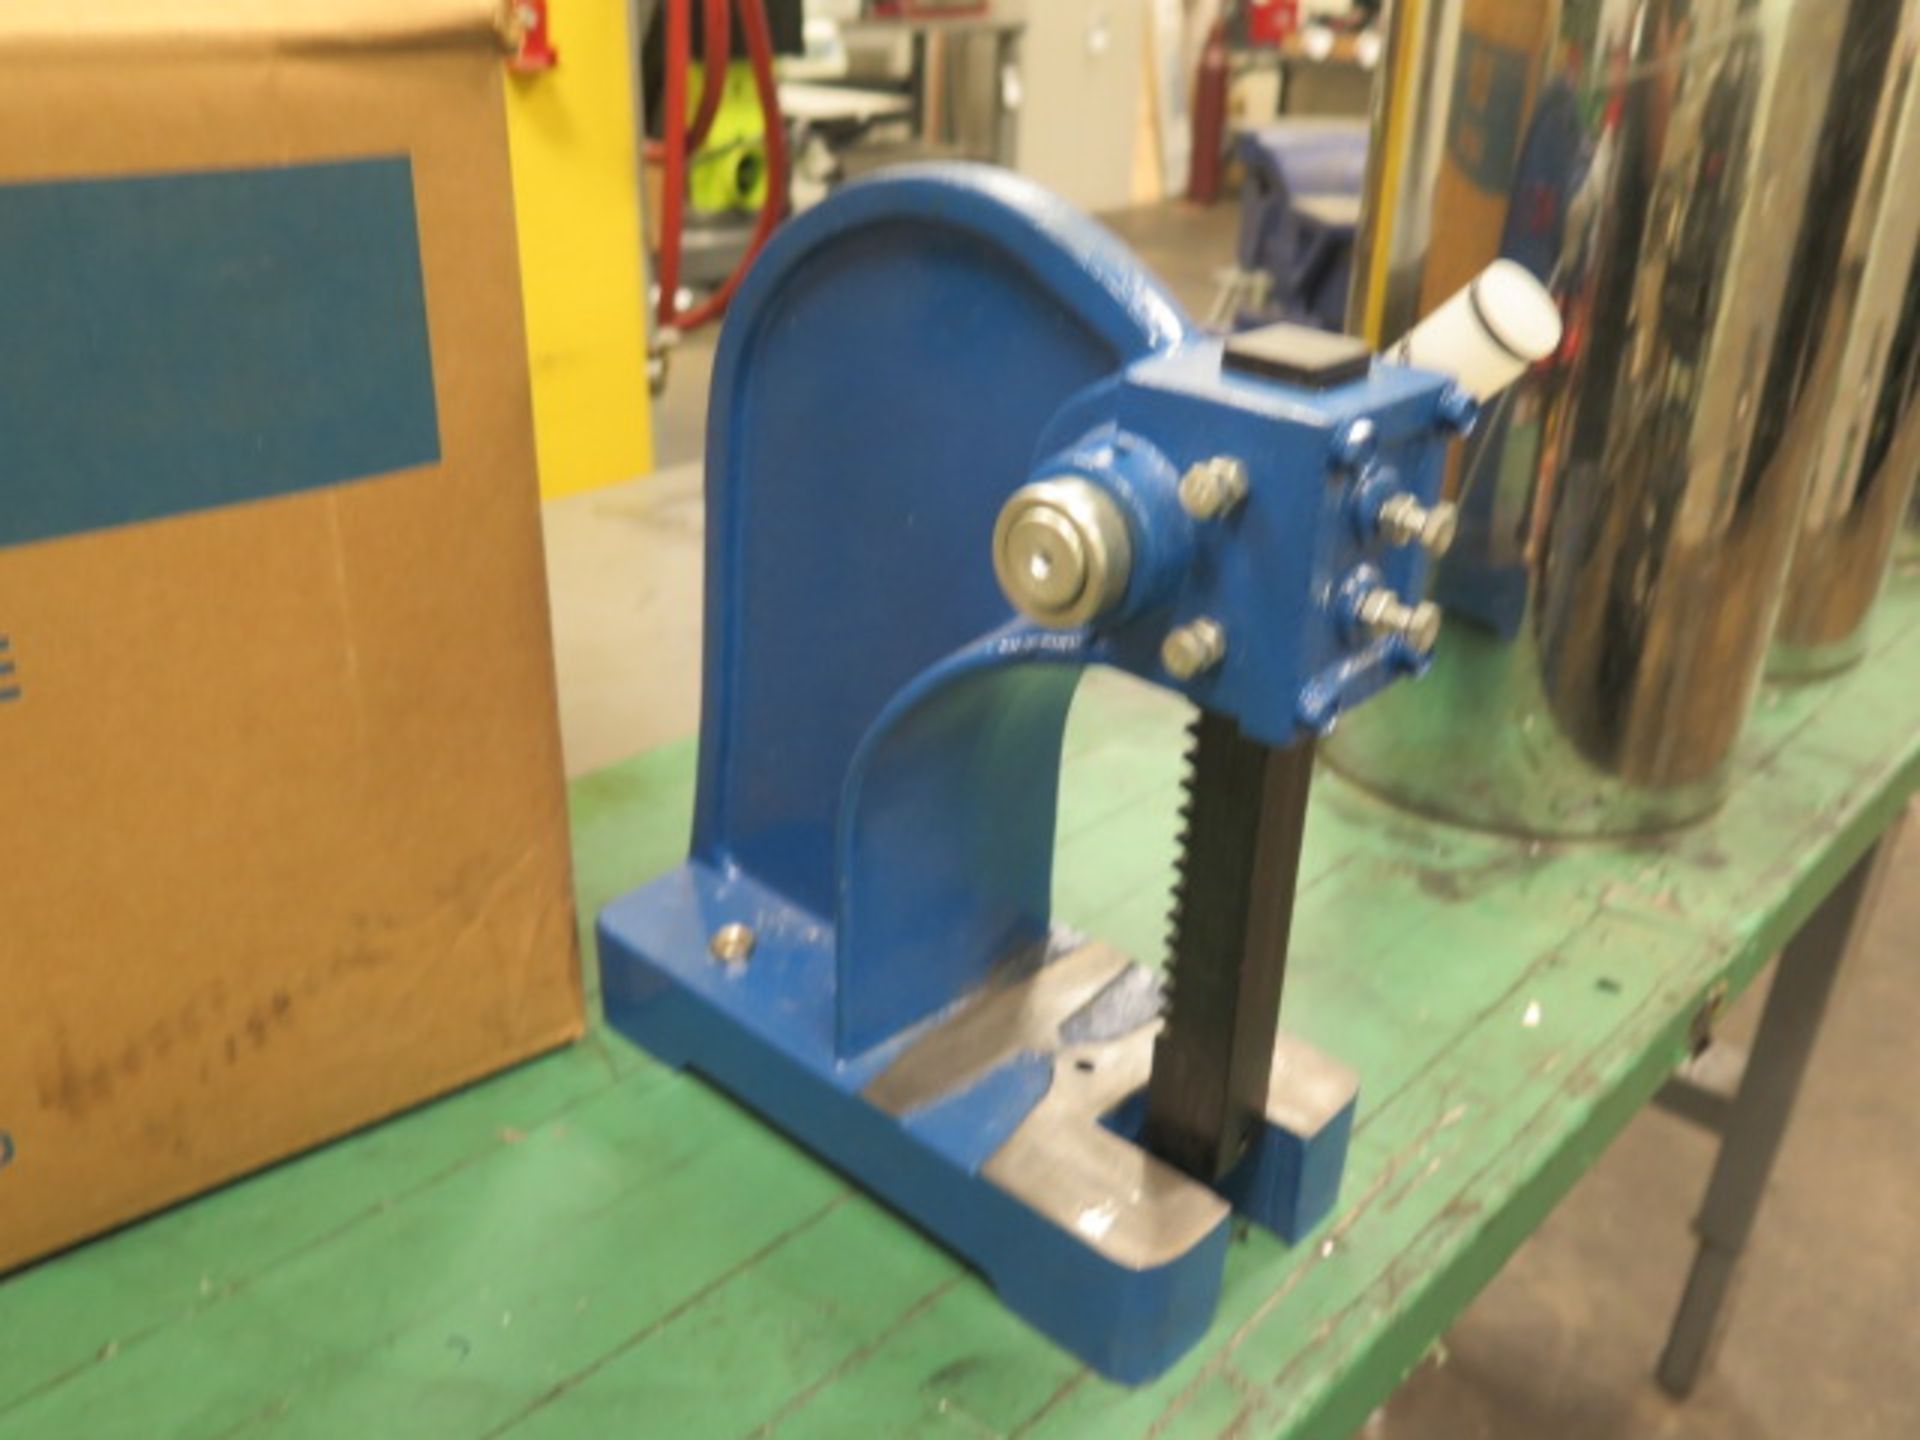 Uline Steel Work bench w/ Bench Vise and Arbor Press (SOLD AS-IS - NO WARRANTY) - Image 5 of 6